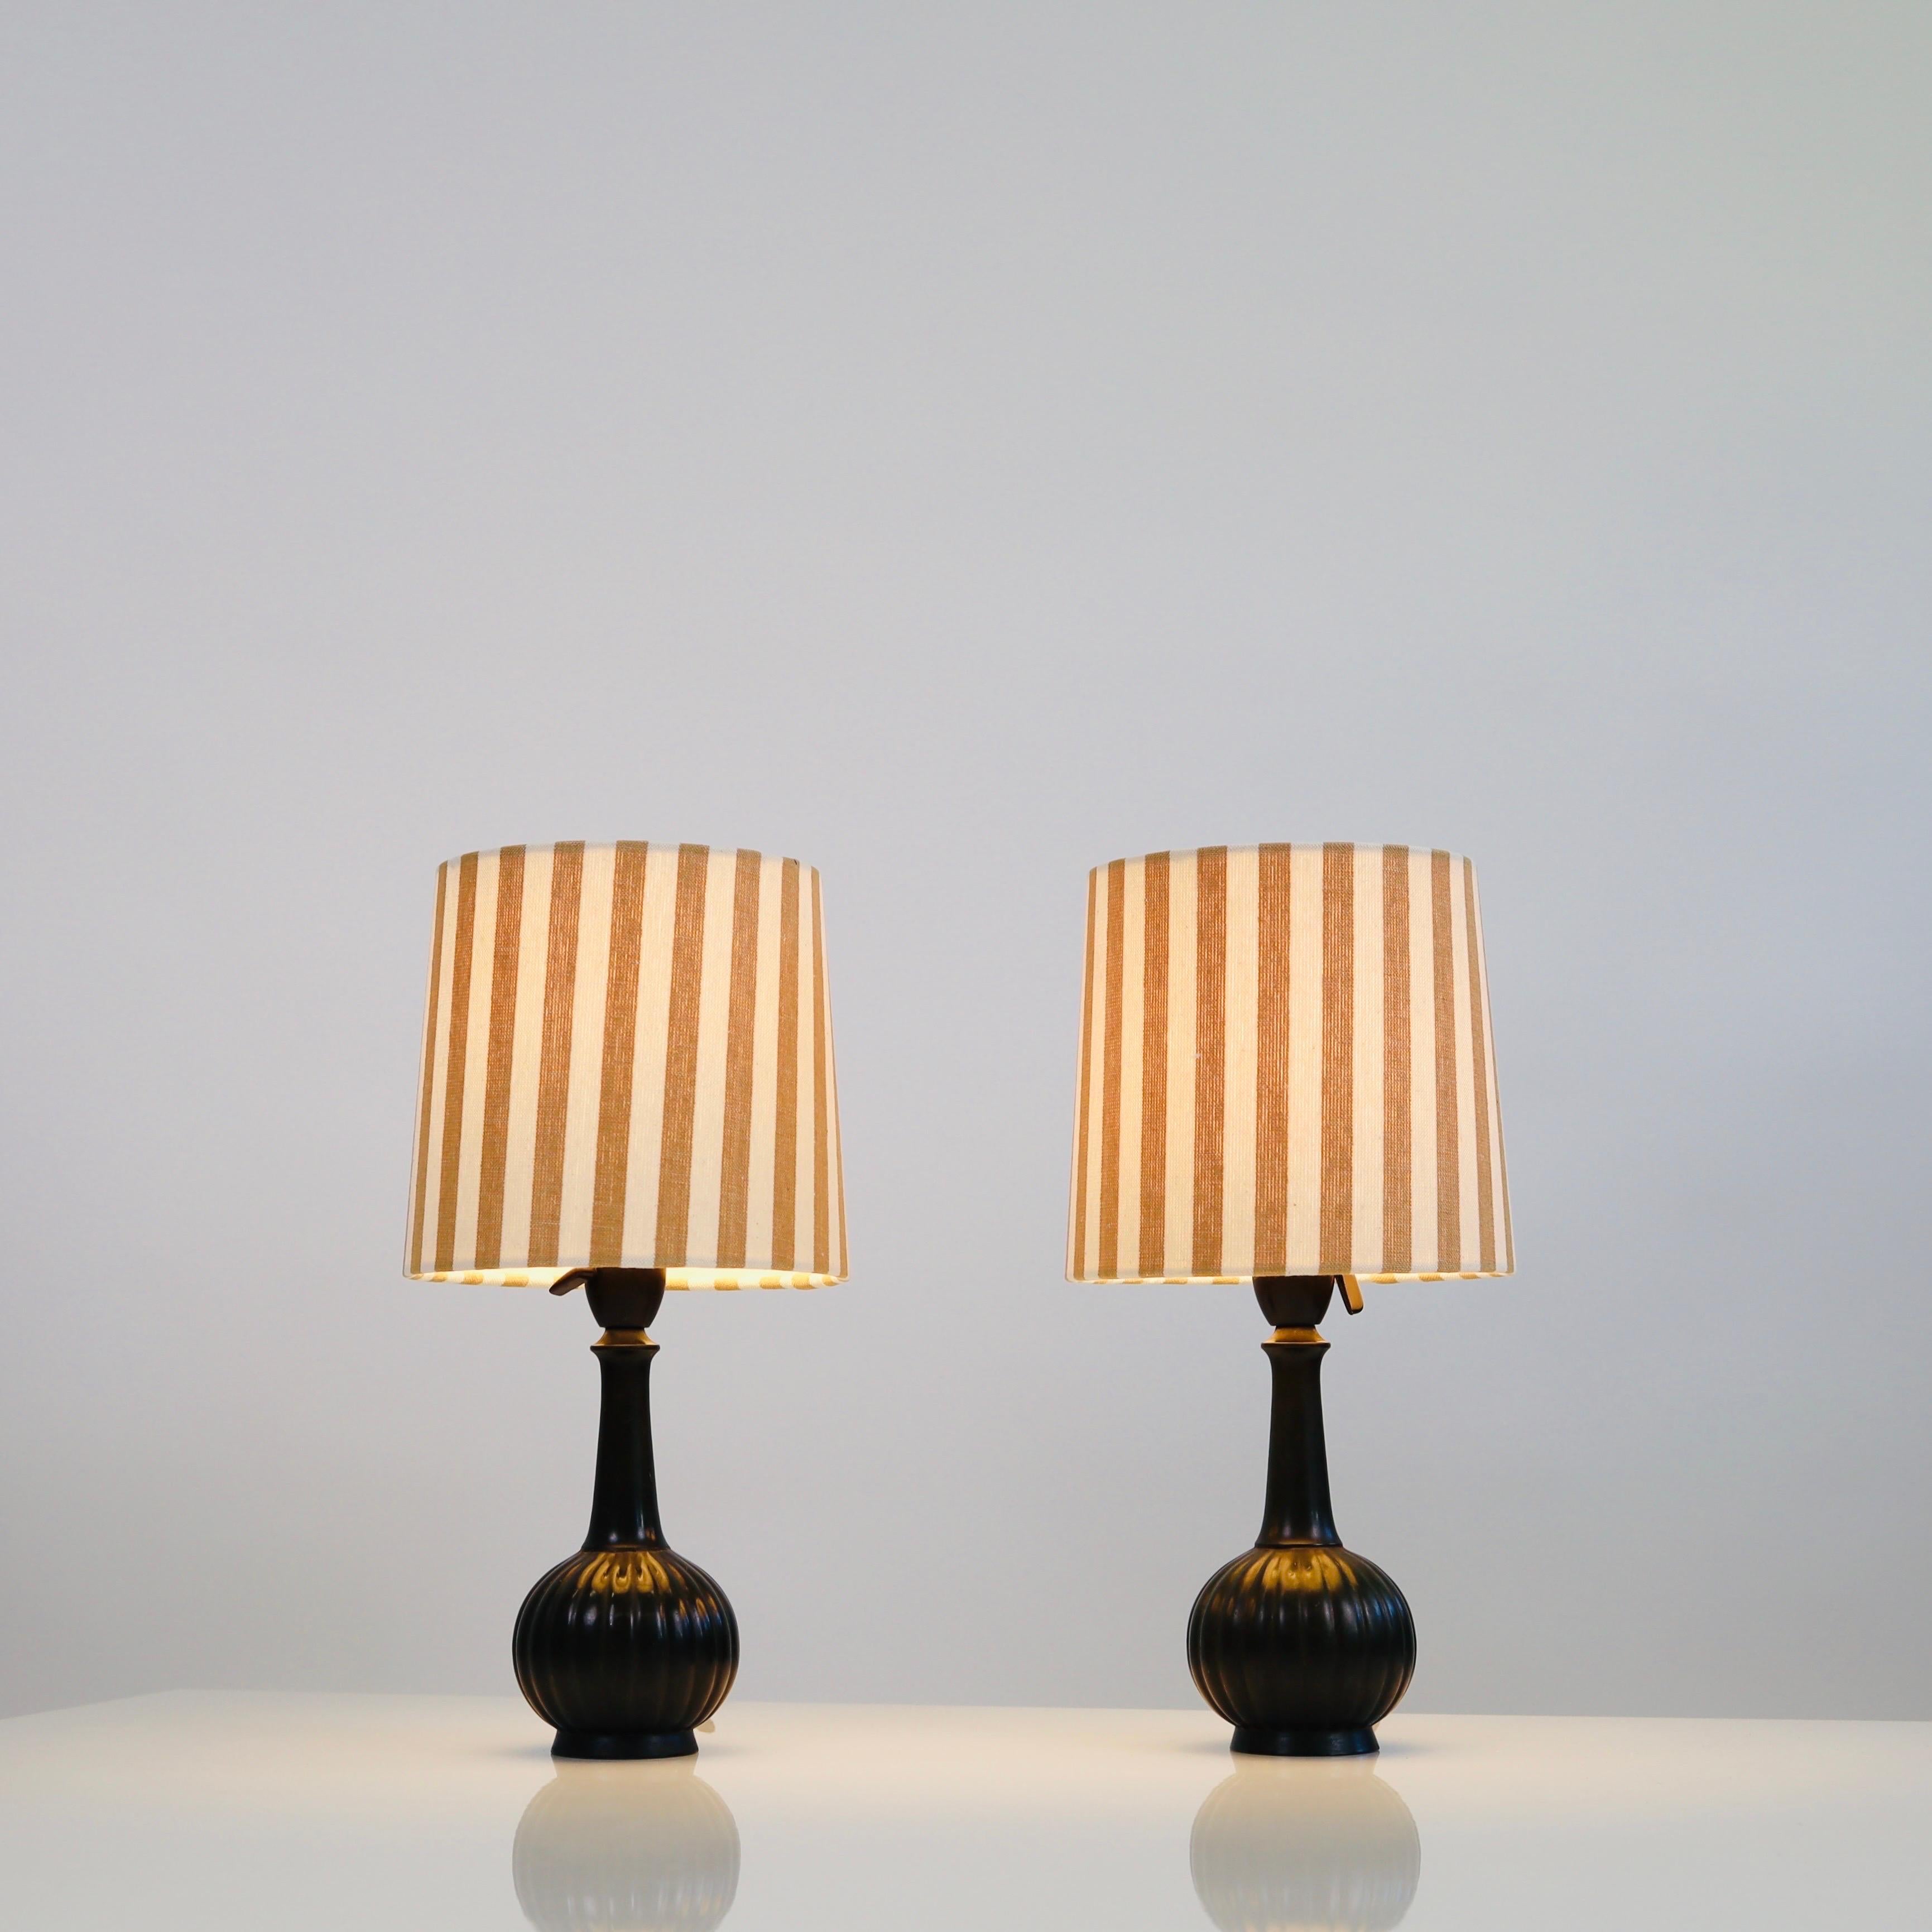 A set of Just Andersen table lamps made in the 1920s and accomplished with new shades made of artisan textile from Mallorca. A rare, exquisite set closing in on a 100 years of life-time.

* A set of metal desk lamps with a round base with vertical